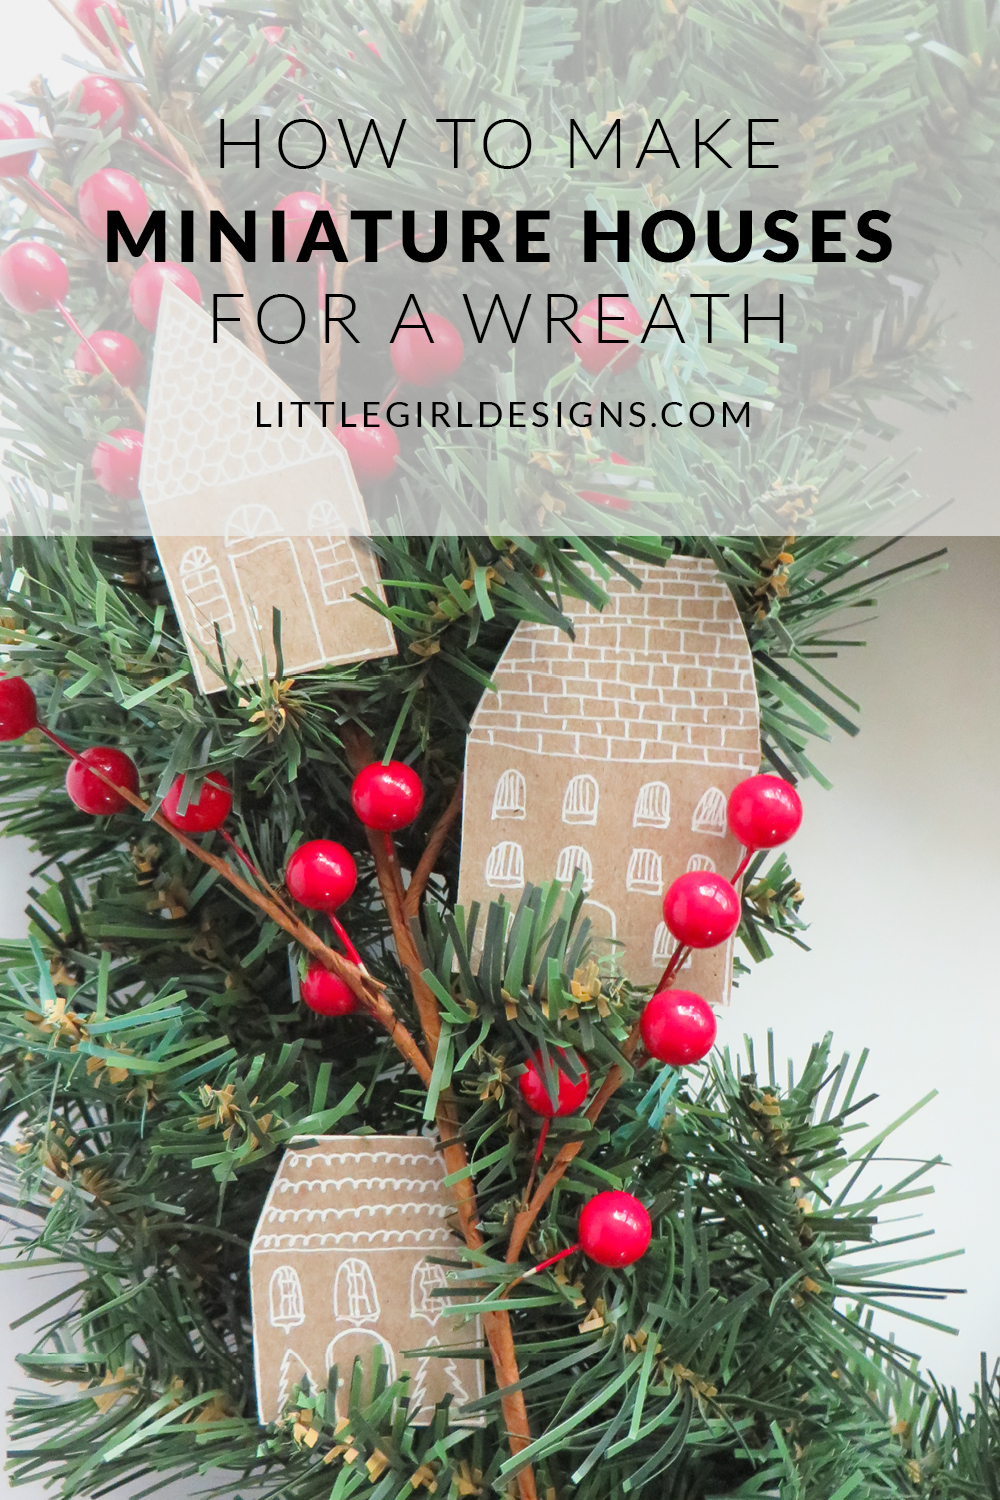 How to Make Miniature Houses for a Christmas Wreath - Want to dress up a wreath but don't have the budget and/or time? This tutorial uses a couple of common items to make cute houses for a wreath. p.s. If you hole-punch the houses and add a ribbon, they also make darling ornaments! @ littlegirldesigns.com